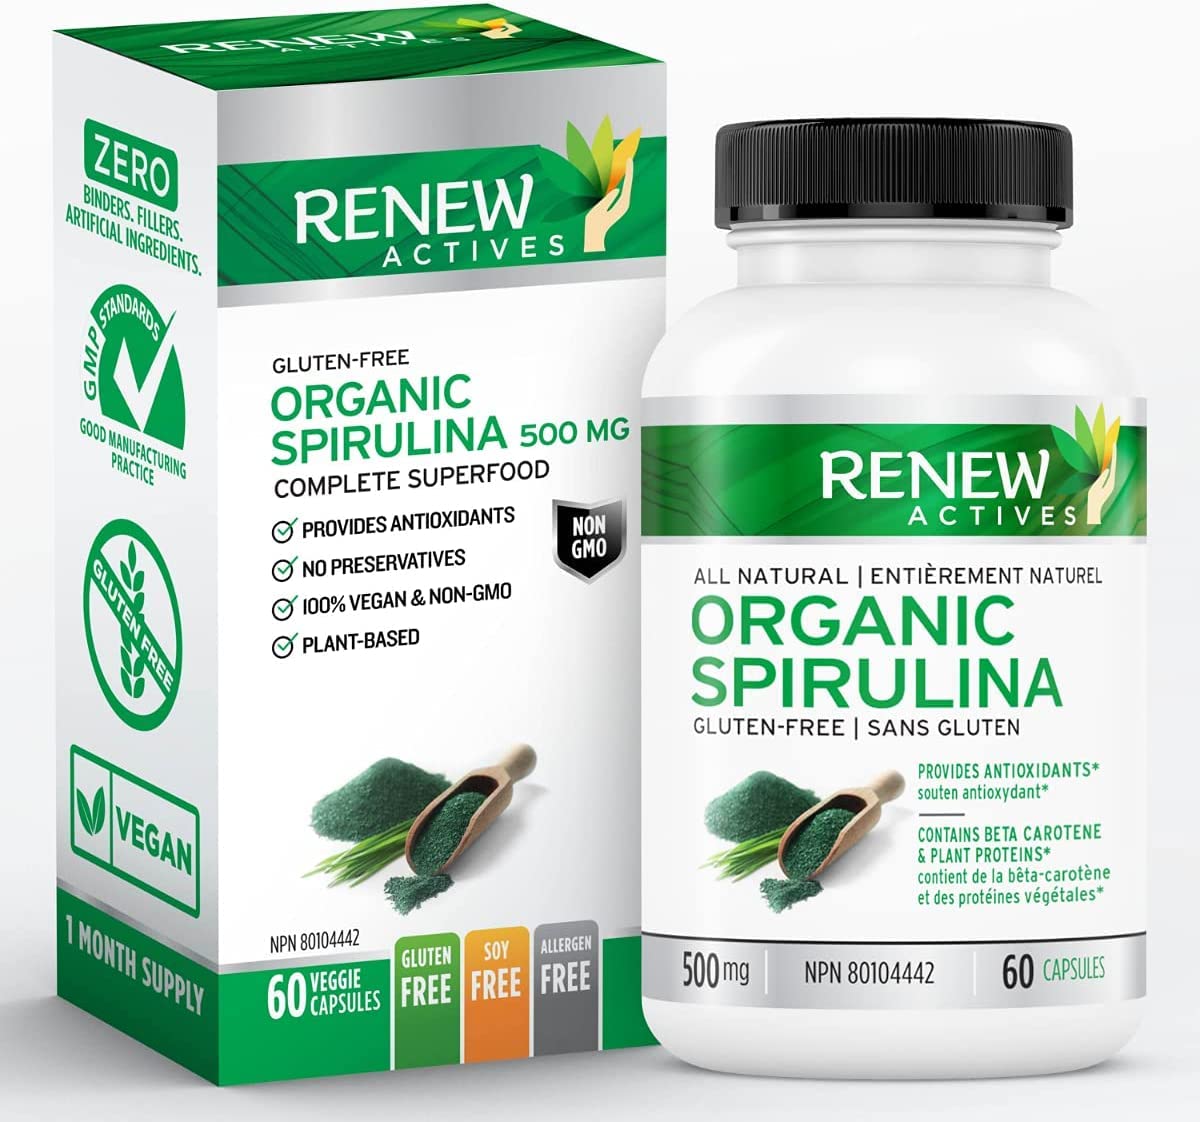 Renew Actives Maximum Strength Spirulina Tablets – Supports Immune System, Heart, Cells and Energy